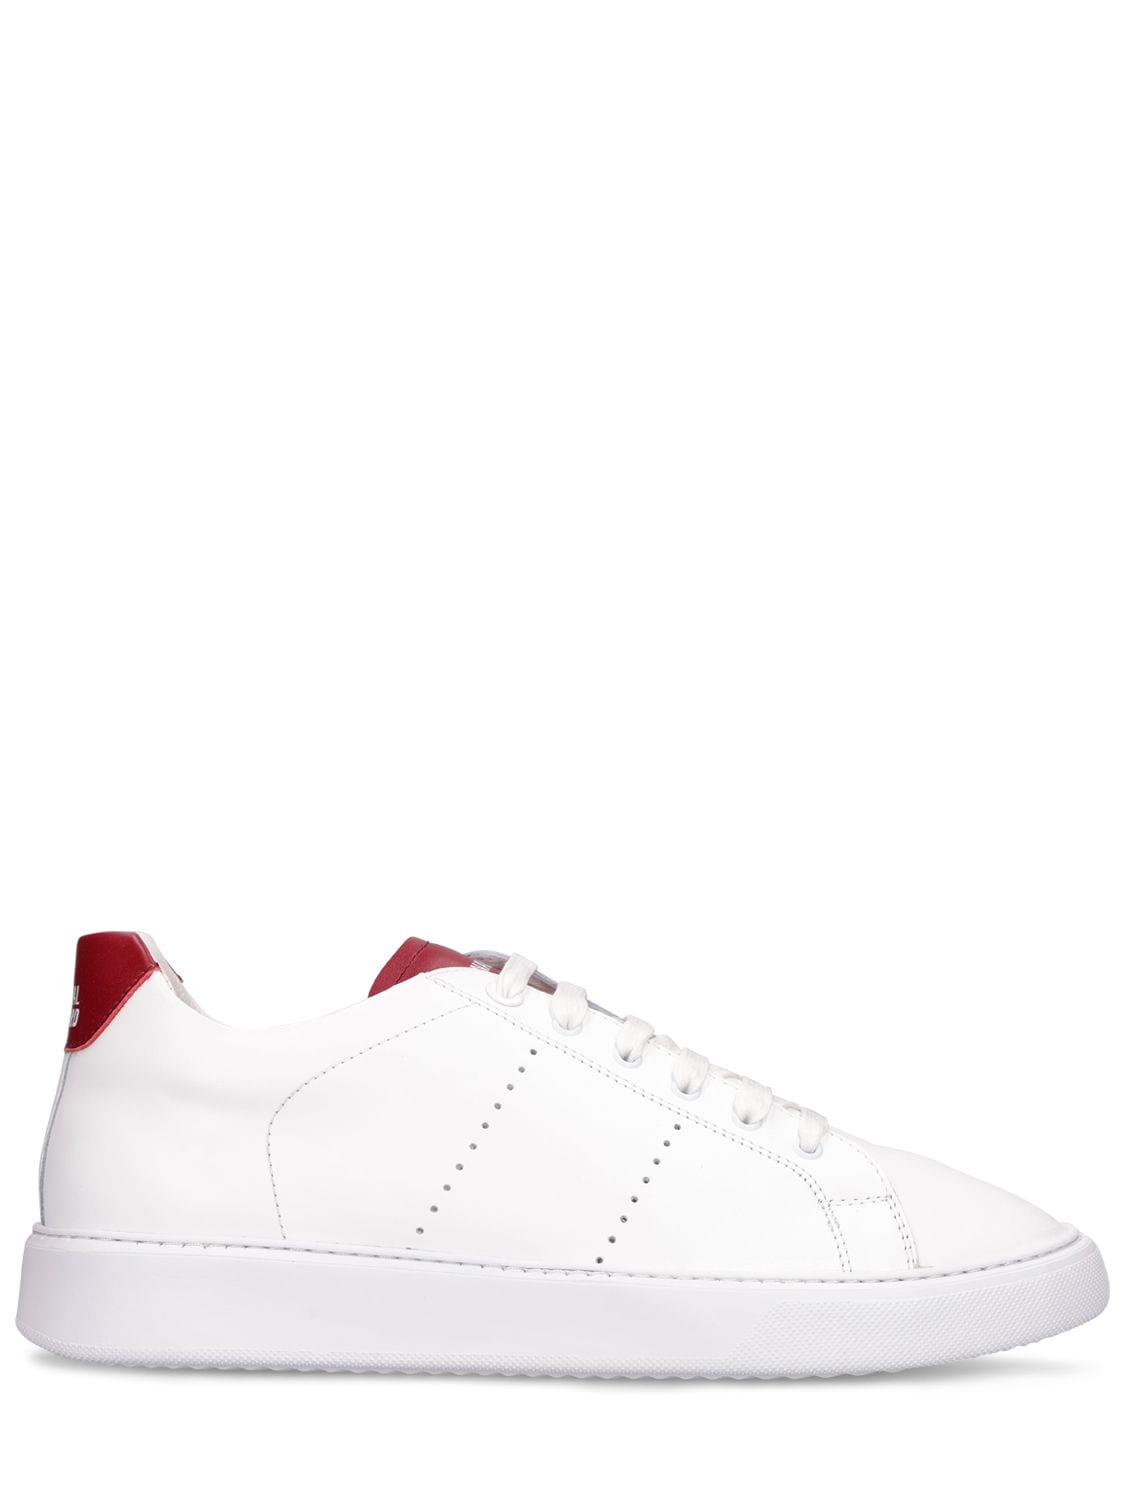 NATIONAL STANDARD EDITION 9 LEATHER LOW SNEAKERS